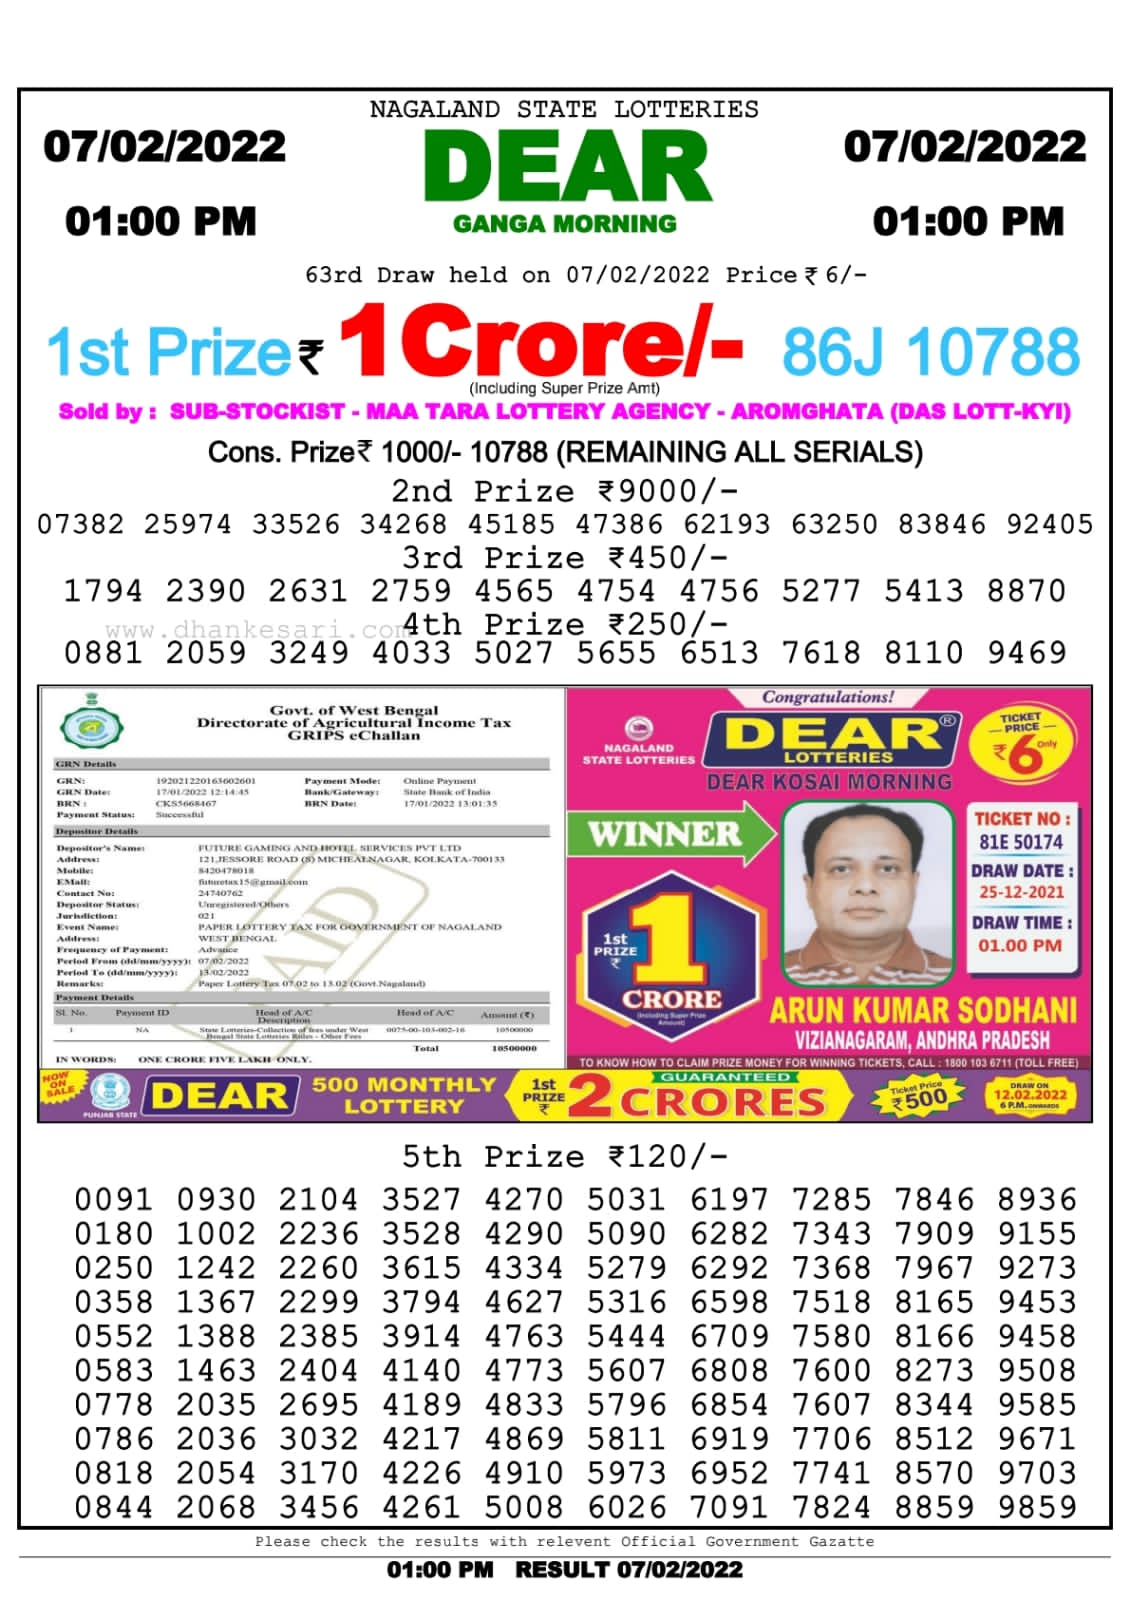 Dear Lottery Nagaland state Lottery Results 1 PM